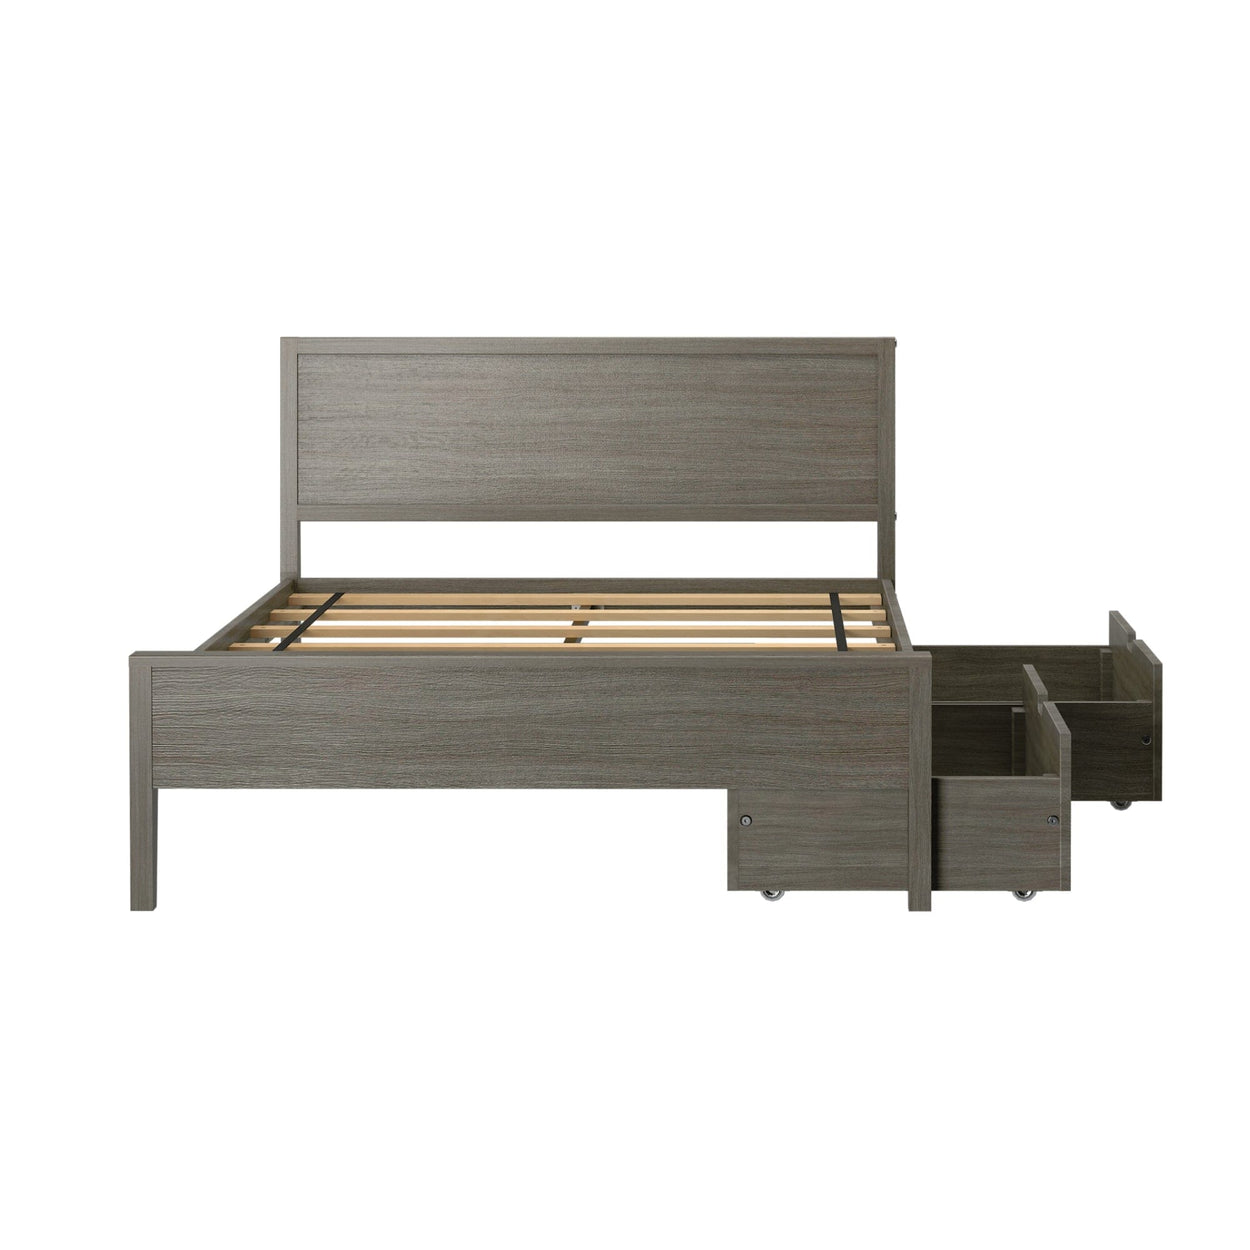 187101-151 : Kids Beds Classic Full-Size Bed with Panel Headboard and Storage Drawers, Clay